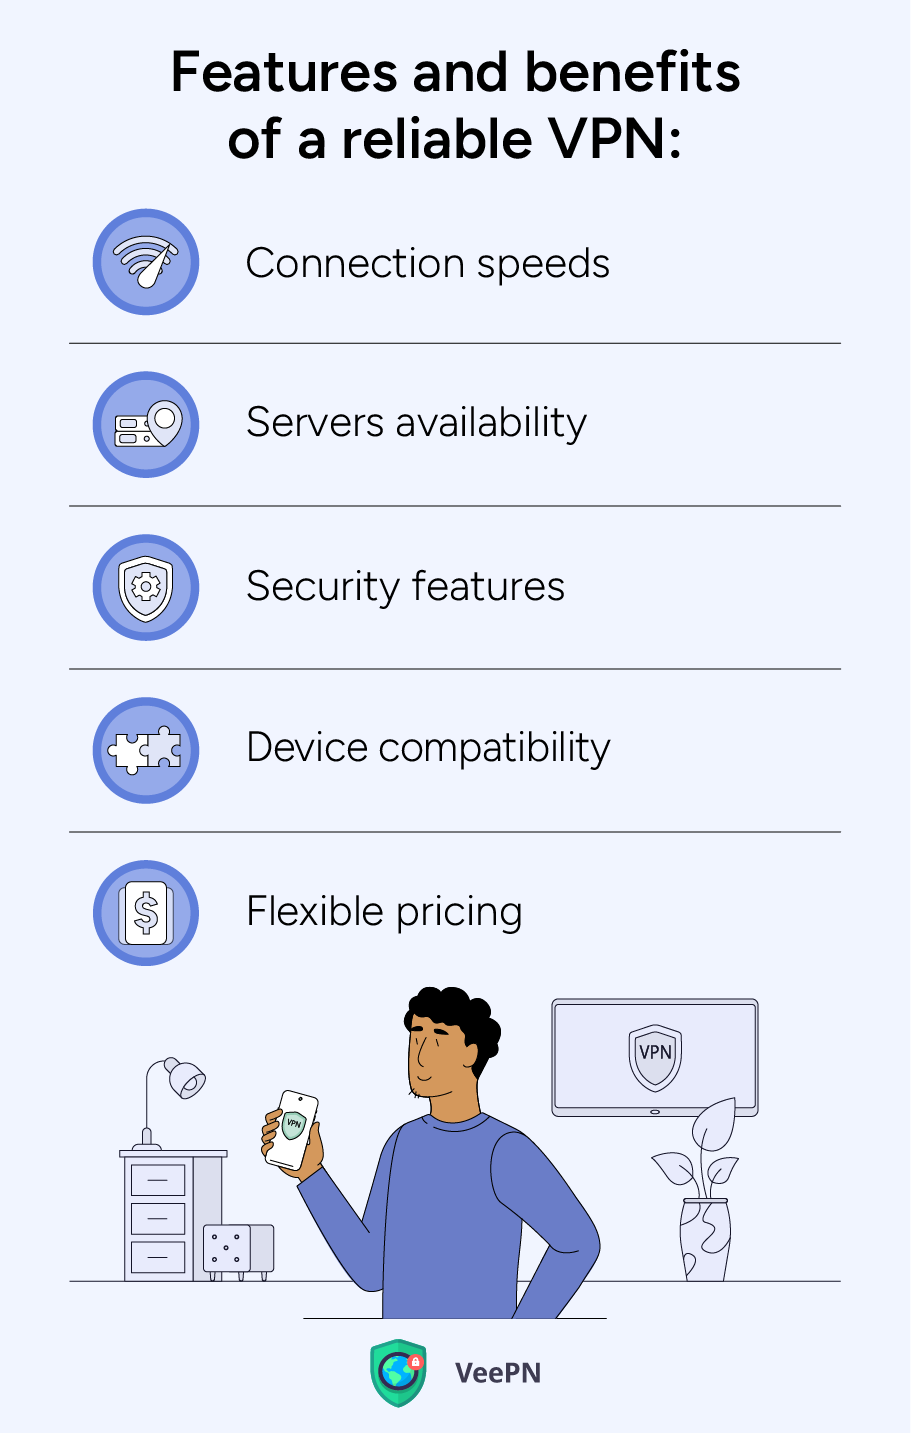 Features and benefits of VPN